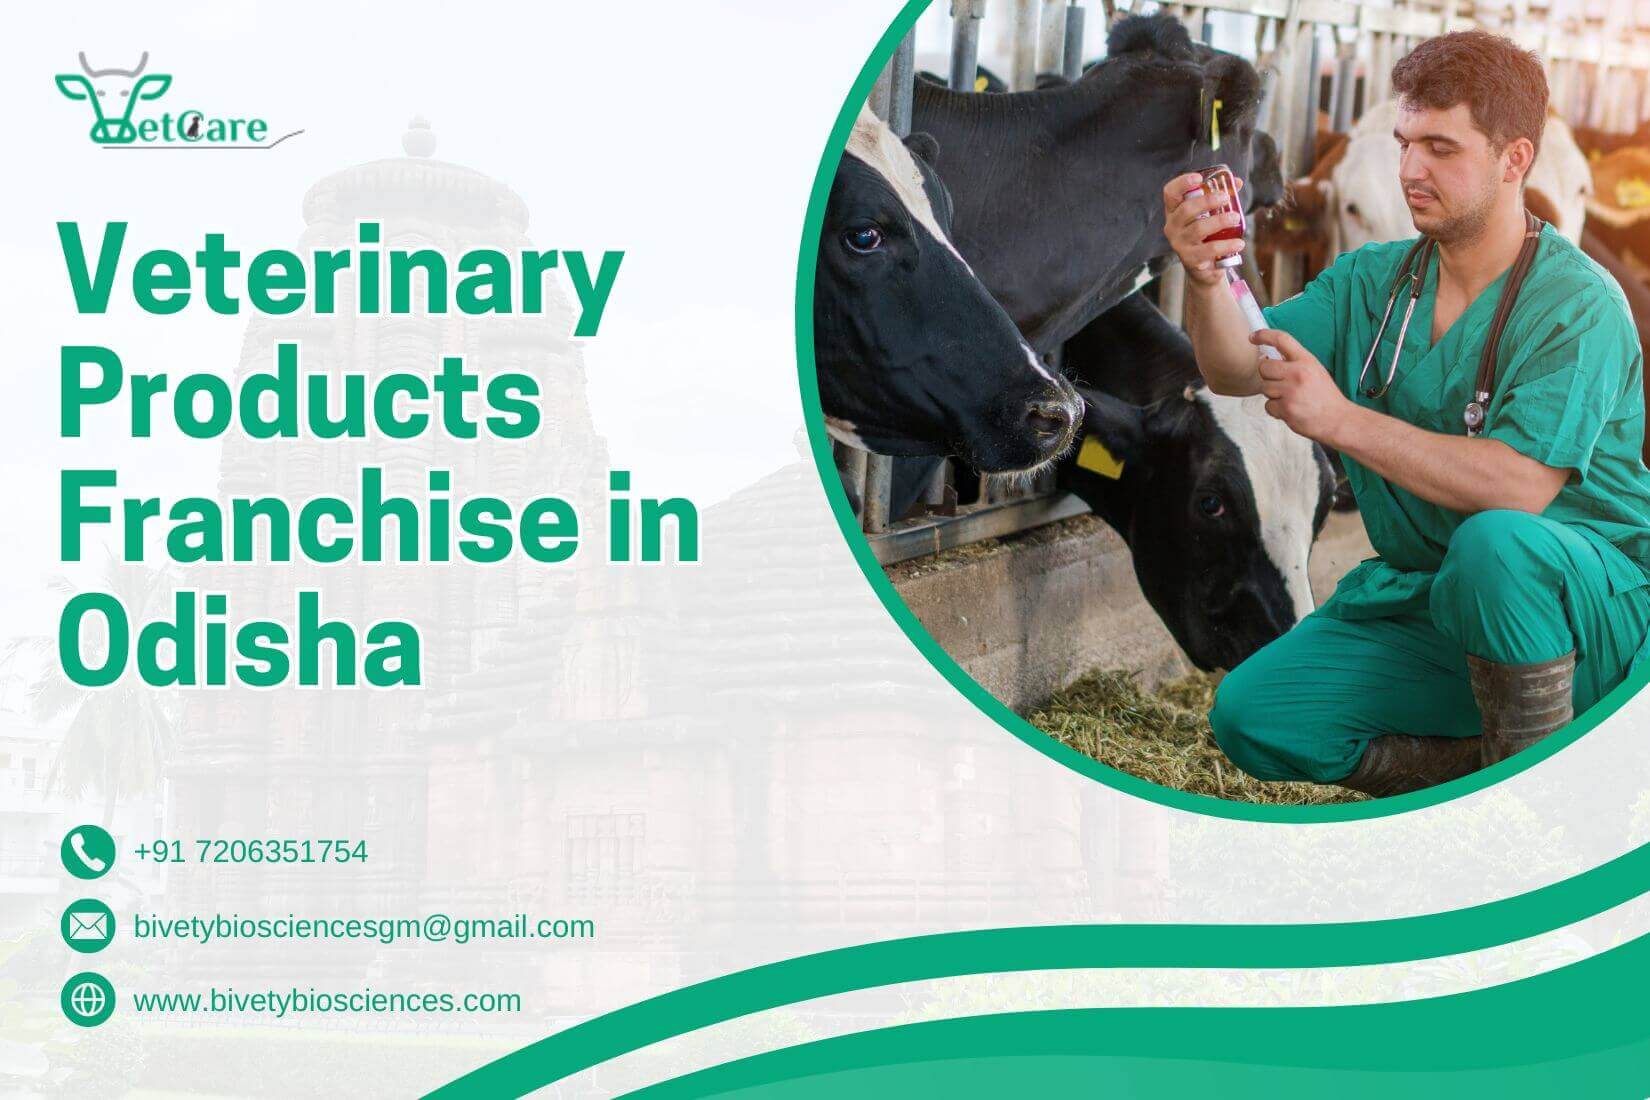 citriclabs | Veterinary Products Franchise in Odisha